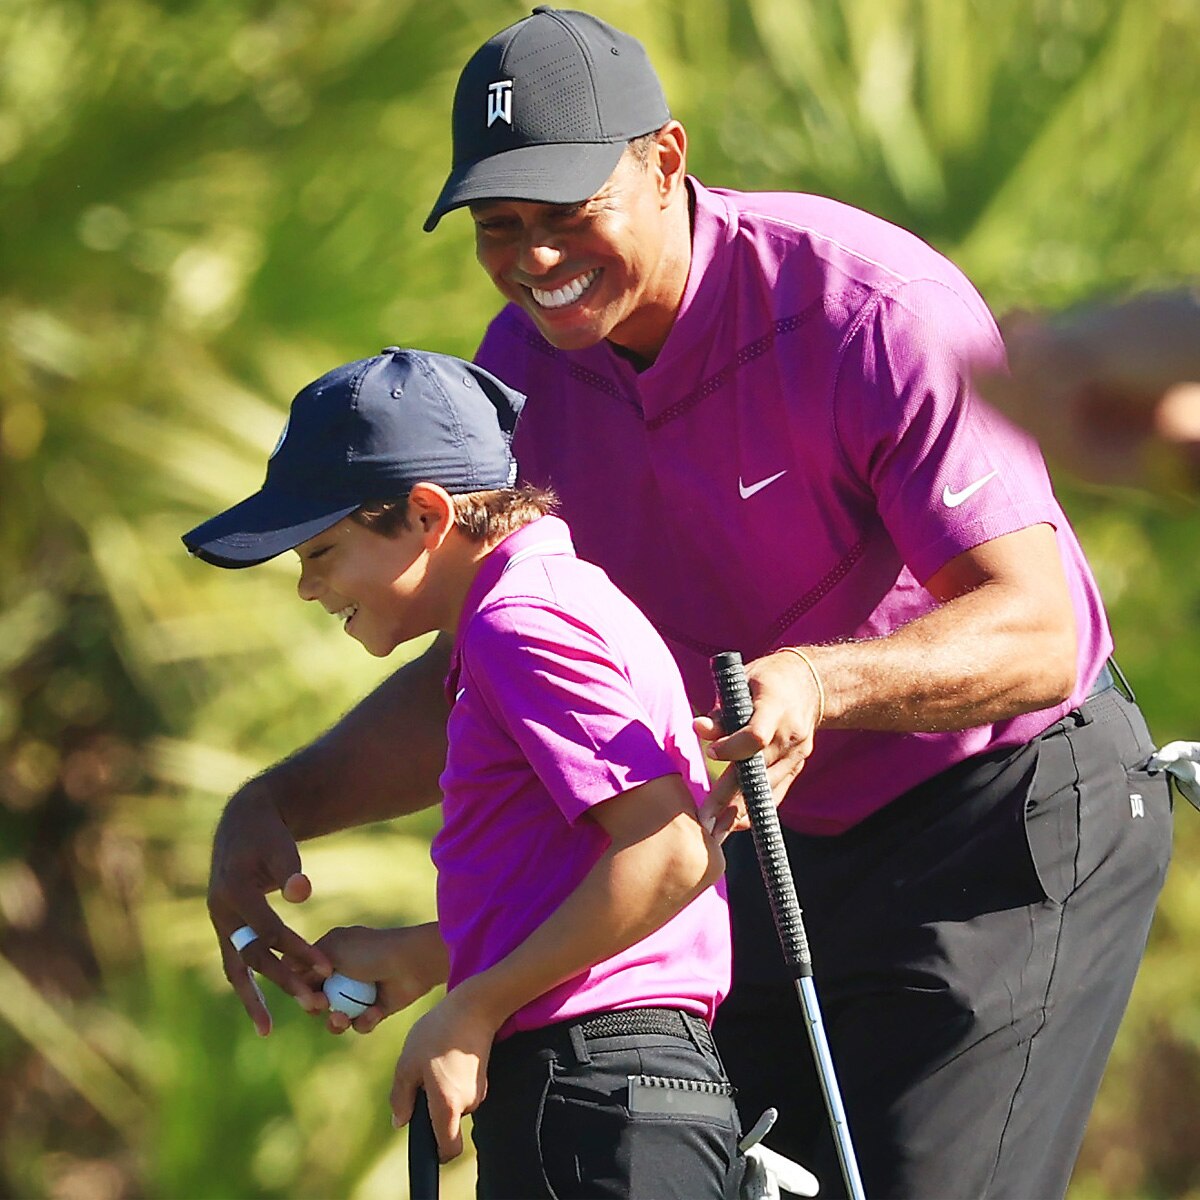 Tiger Woods Son Charlie Shows Off Golf Skills at Tournament With Dad